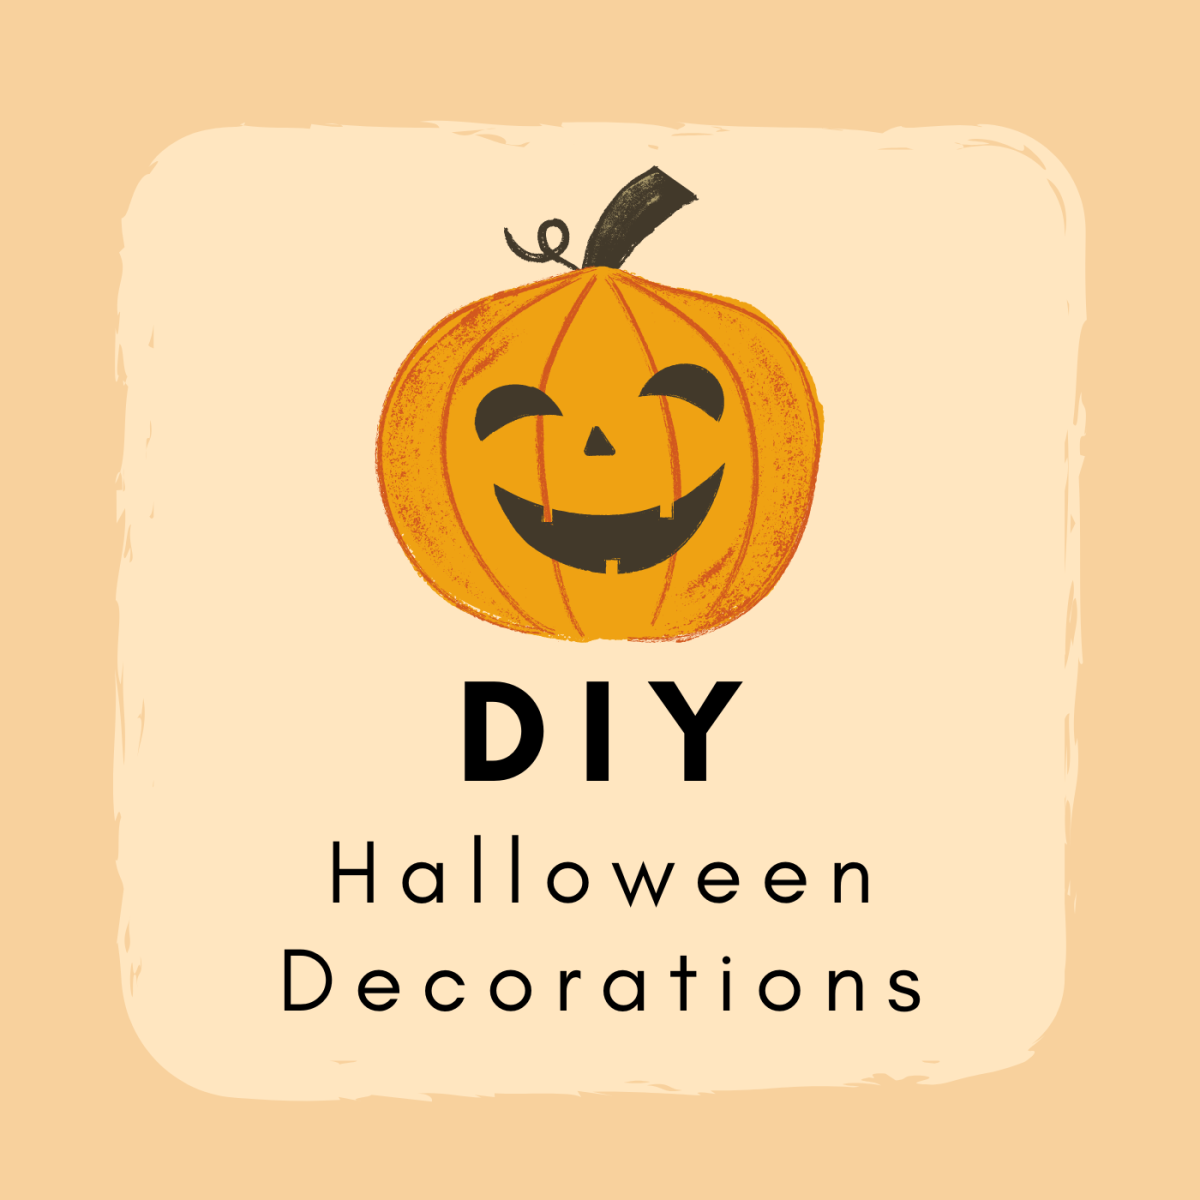 35+ DIY Halloween Decorations That Are Hauntingly Fun to Make